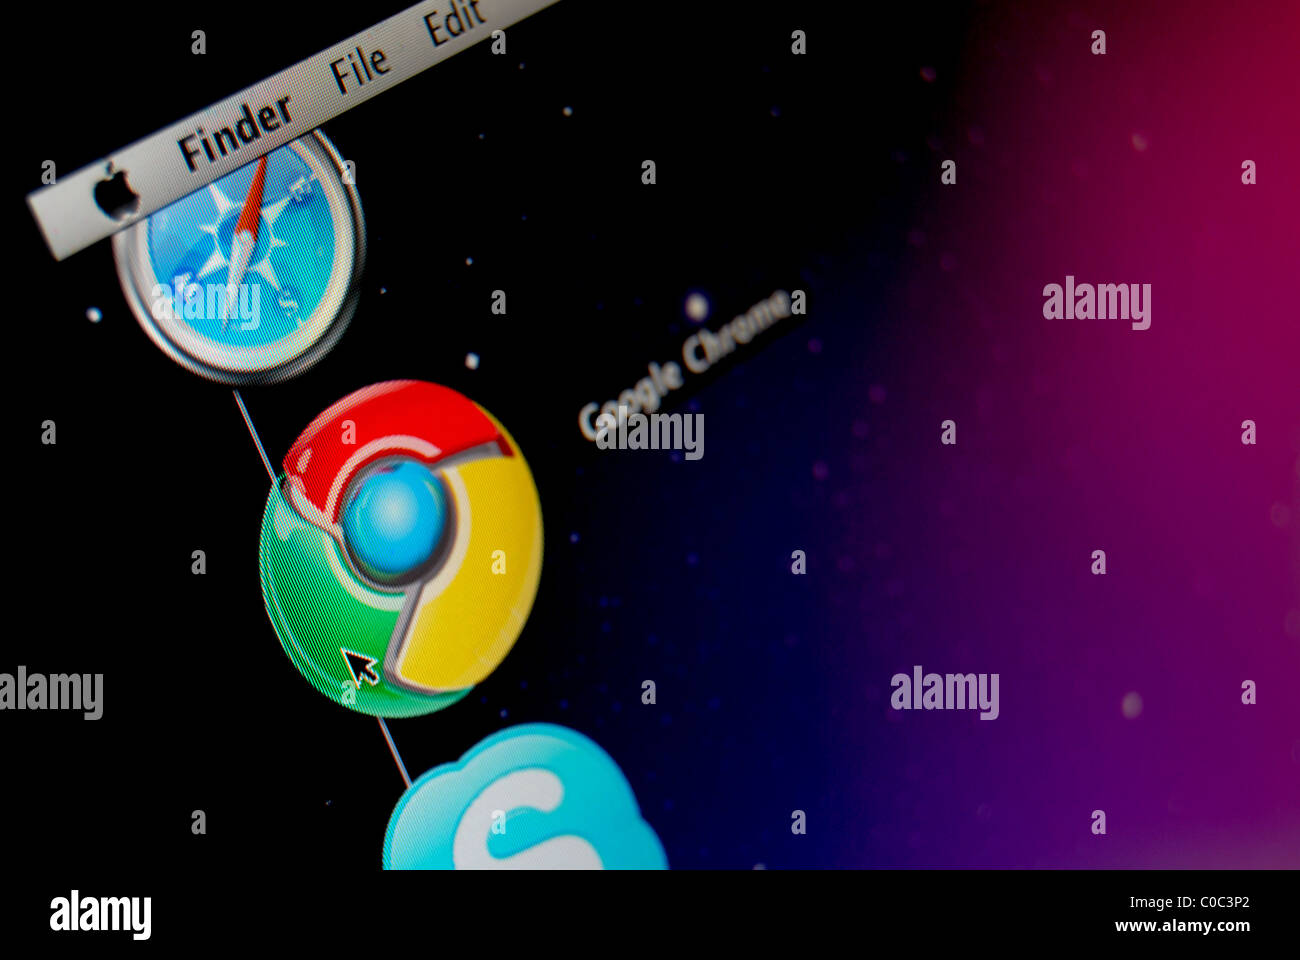 A Photo Illustration Of The Google Chrome Web Browser Application In The Dock Of an Apple MacBook Using OSX Snow Leopard Stock Photo